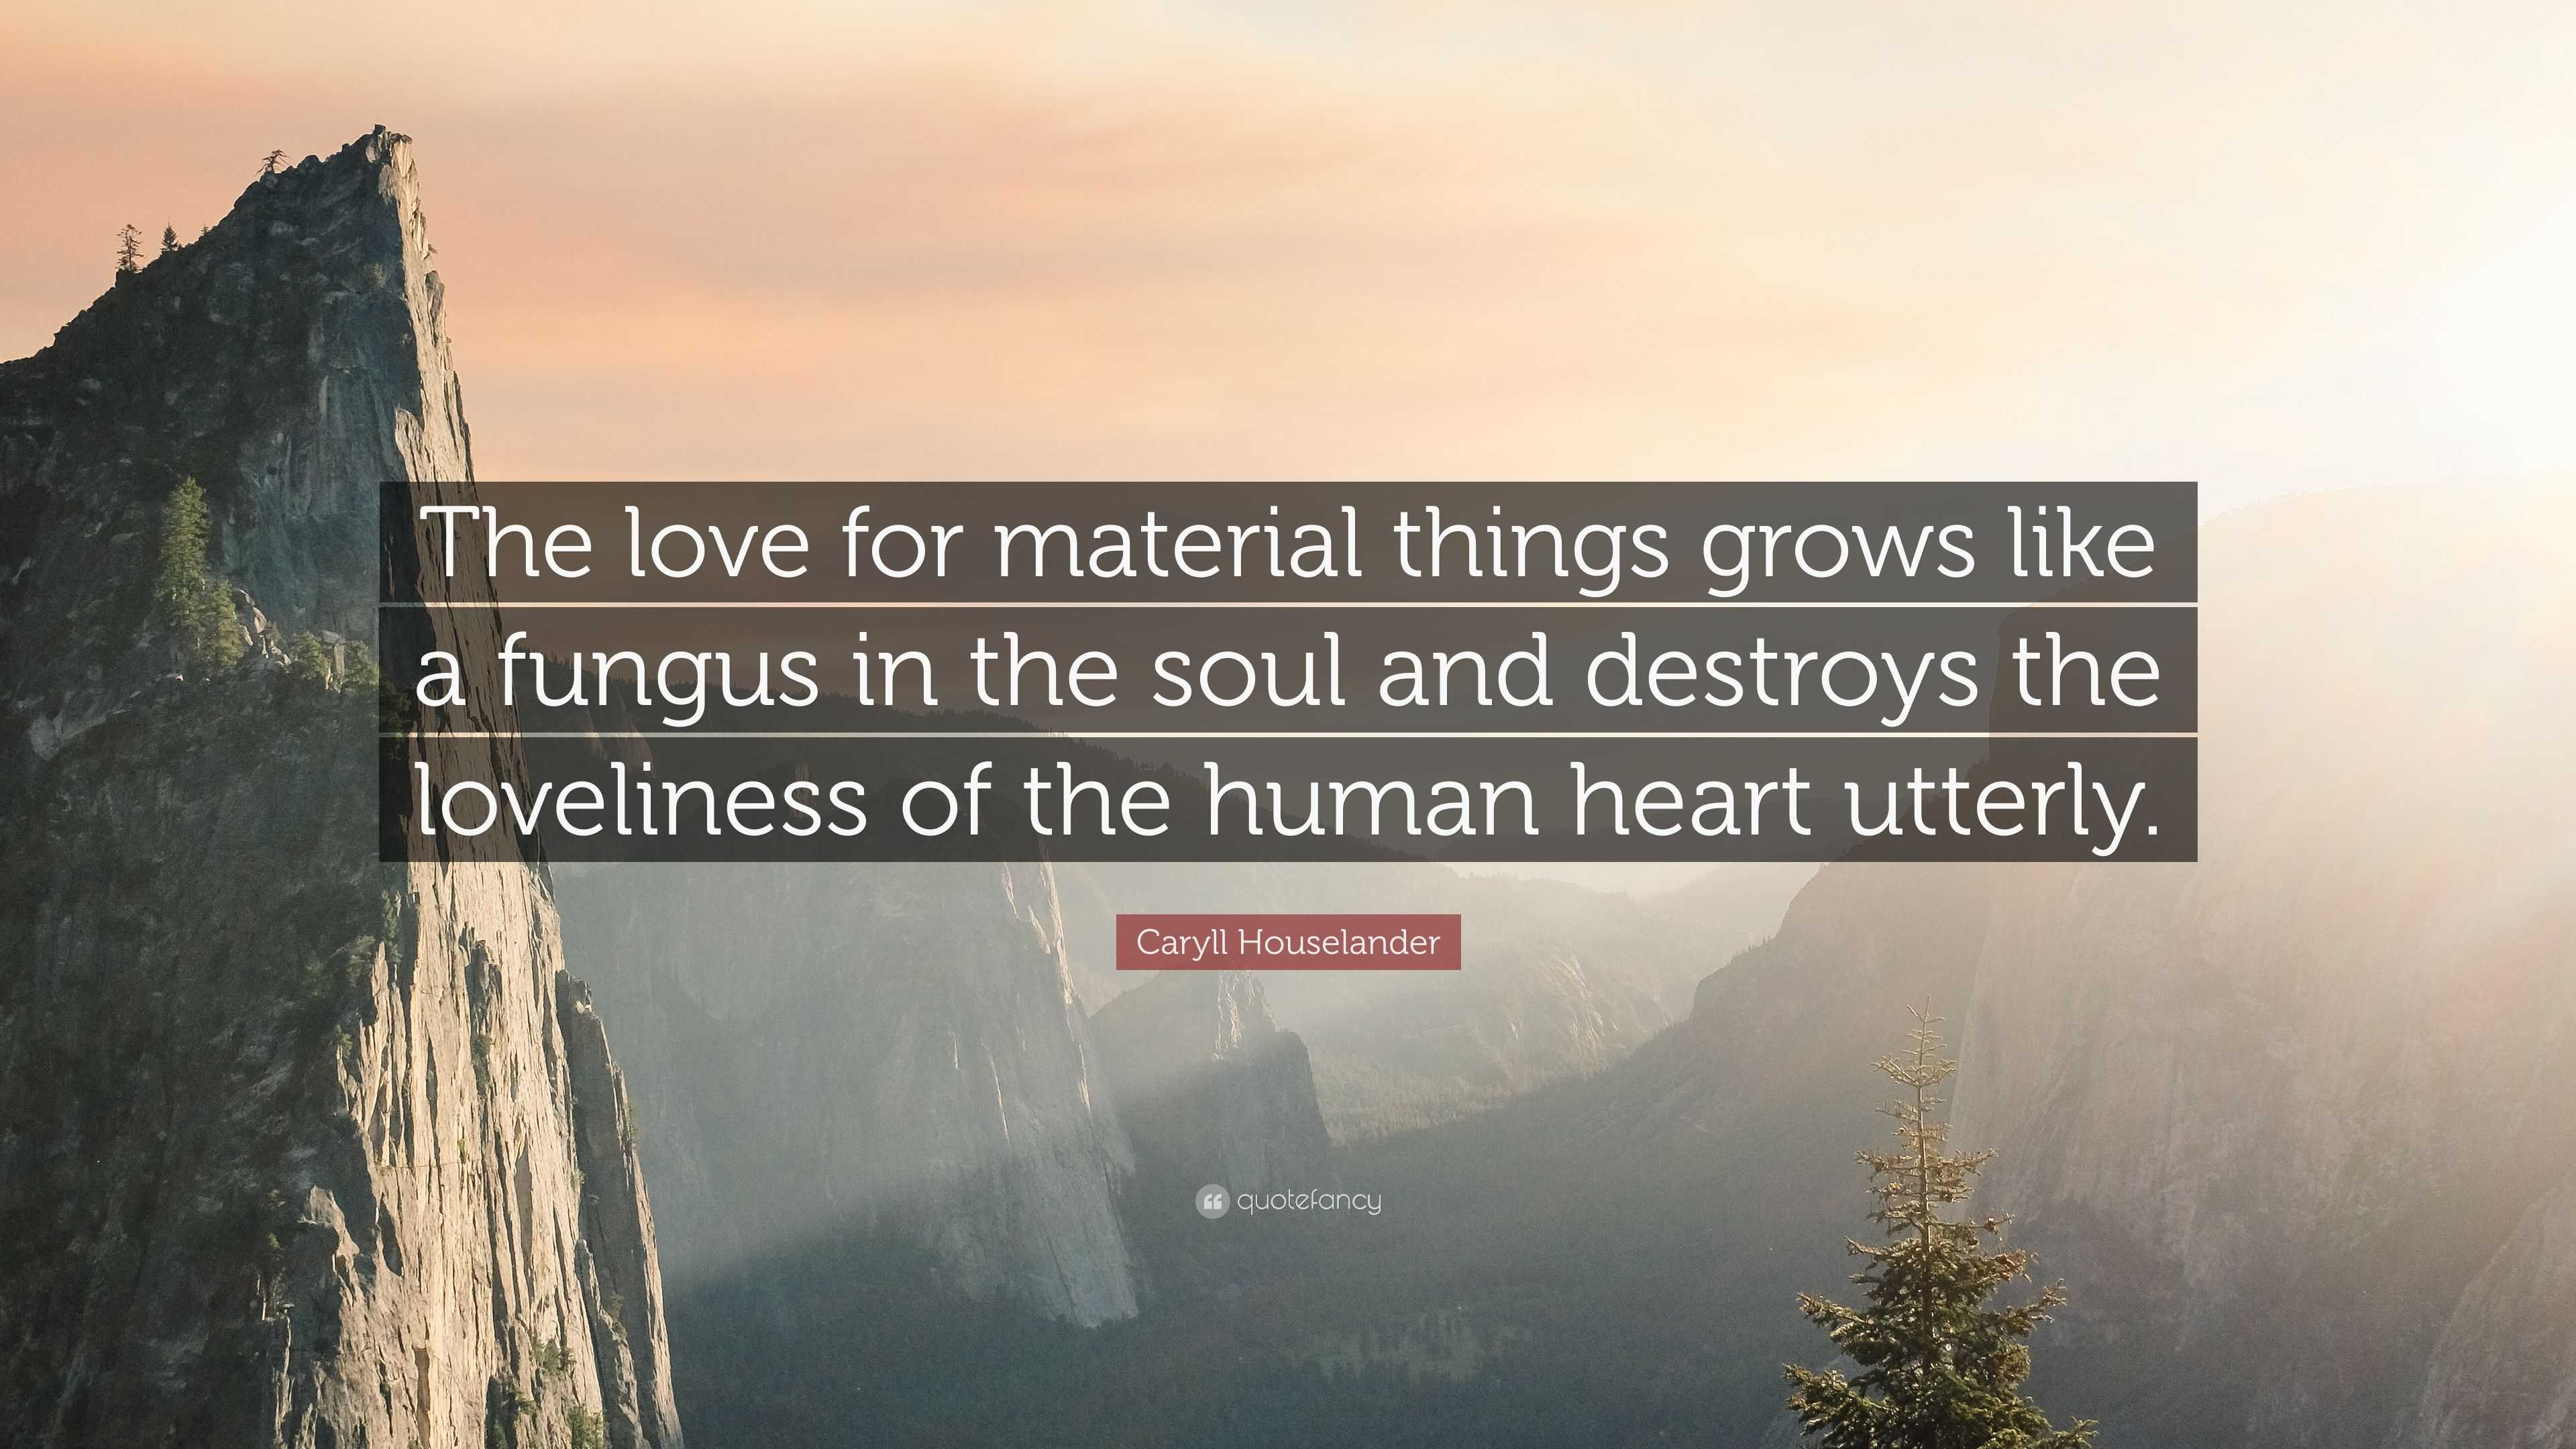 Caryll Houselander Quote: “The love for material things grows like